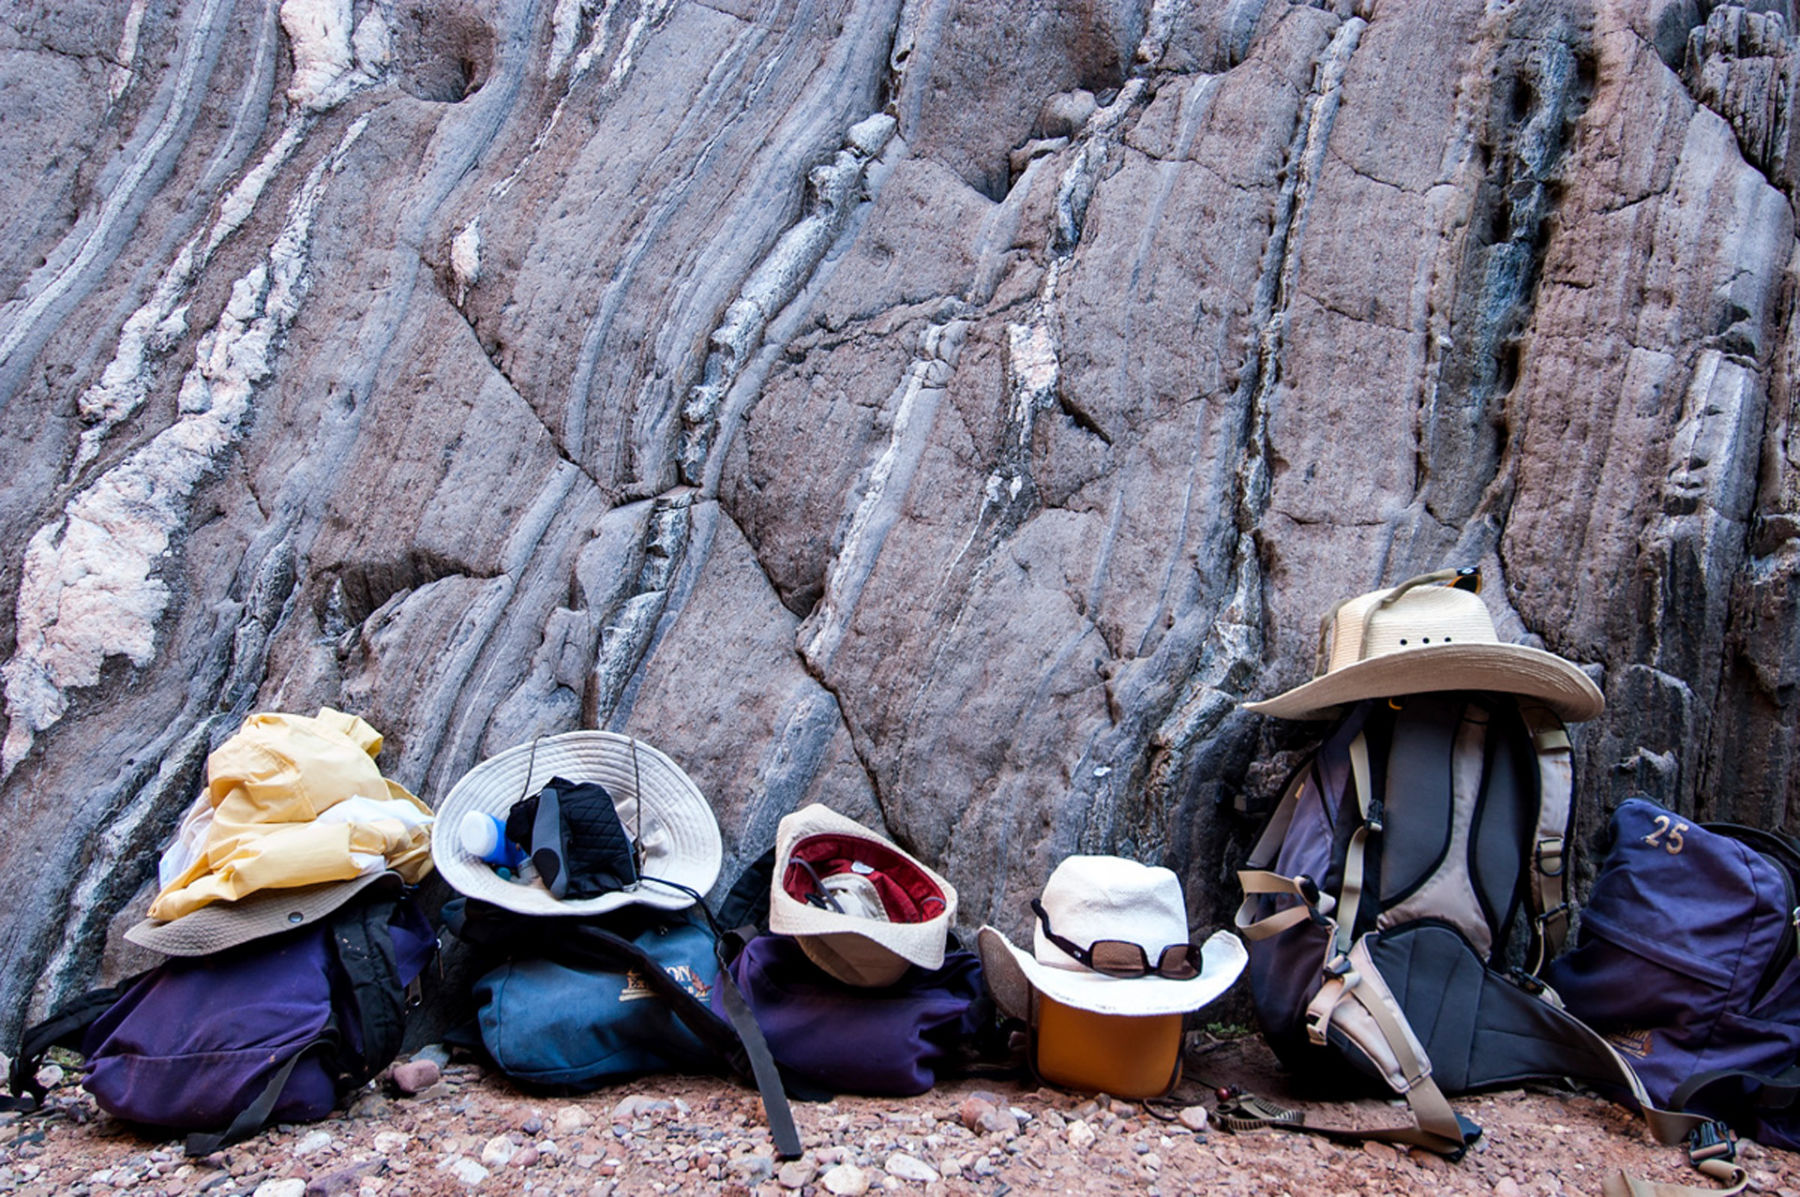 hats and packs for grand canyon rafting trip packing list